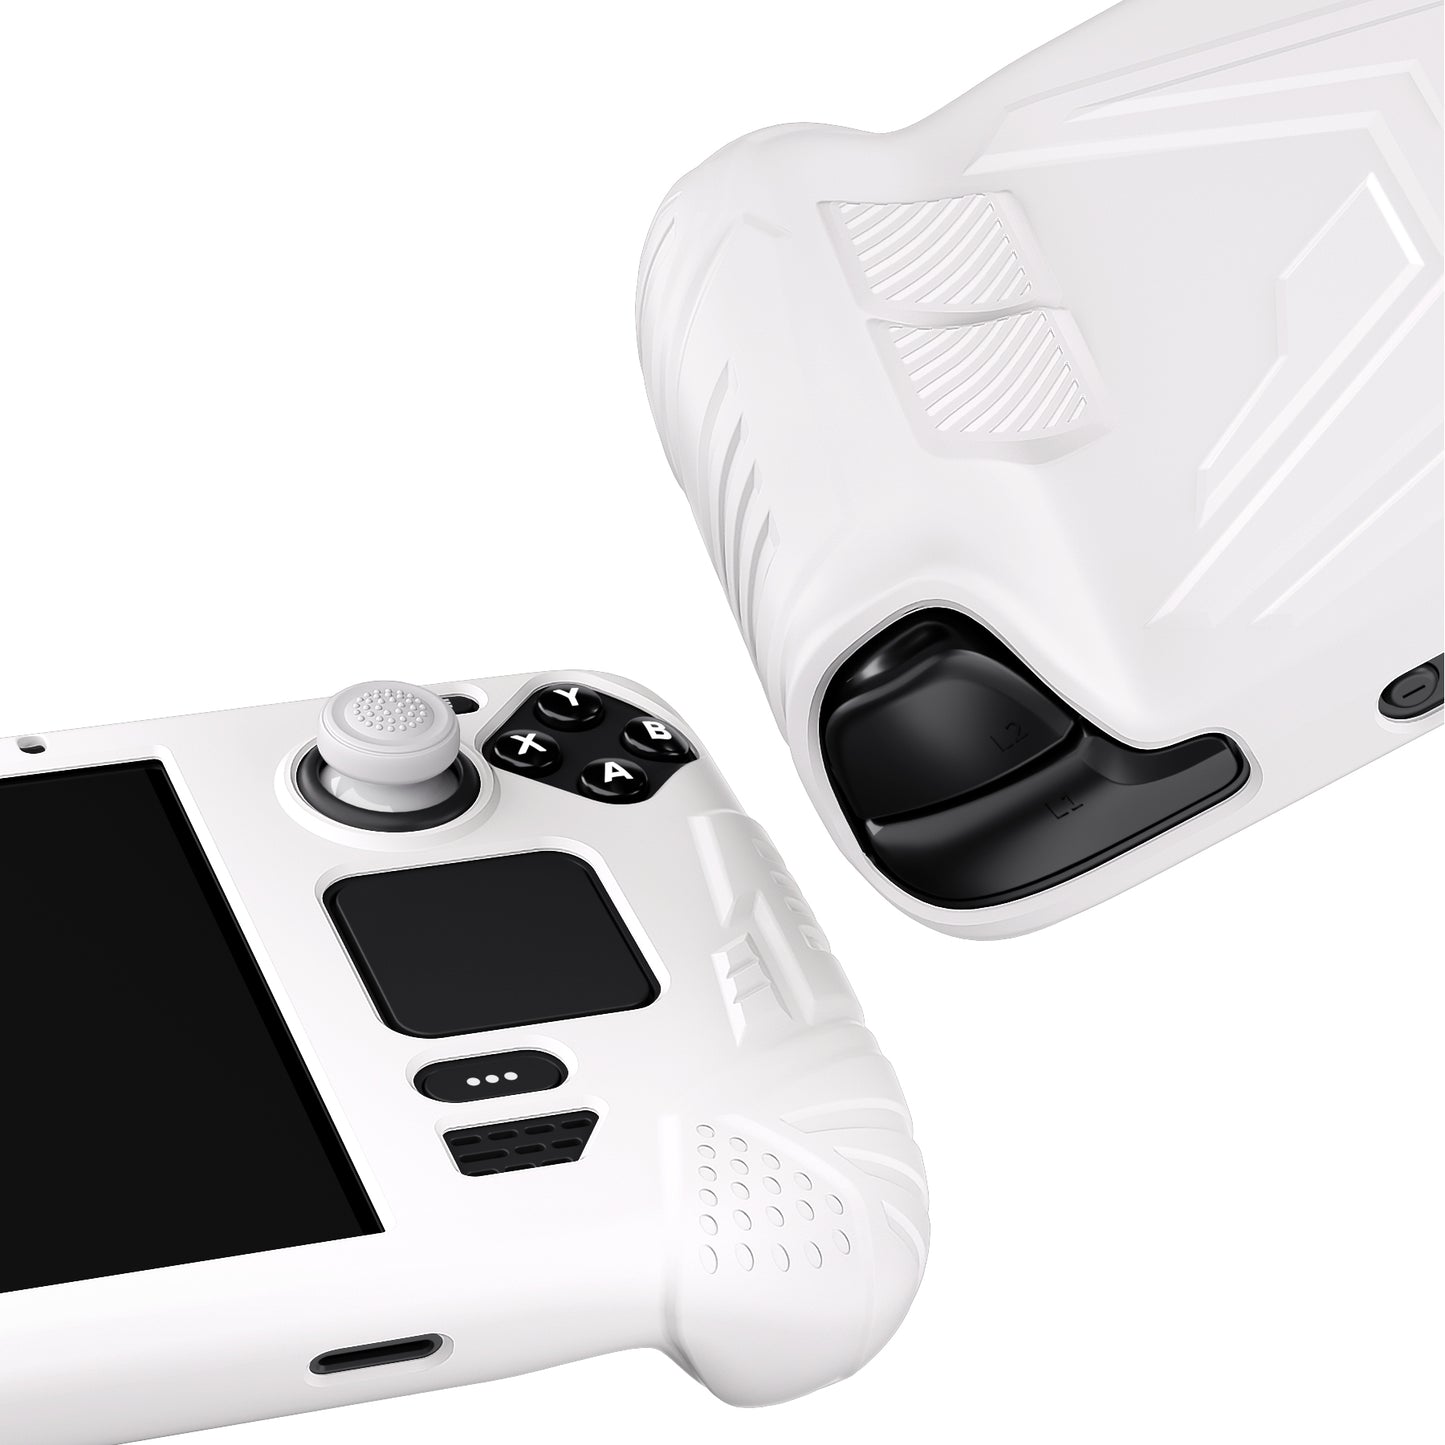 PlayVital Armor Series Protective Case for Steam Deck, Soft Cover Silicone Protector for Steam Deck with Back Button Enhancement Designed & Thumb Grips Caps - White - XFSDP002 PlayVital